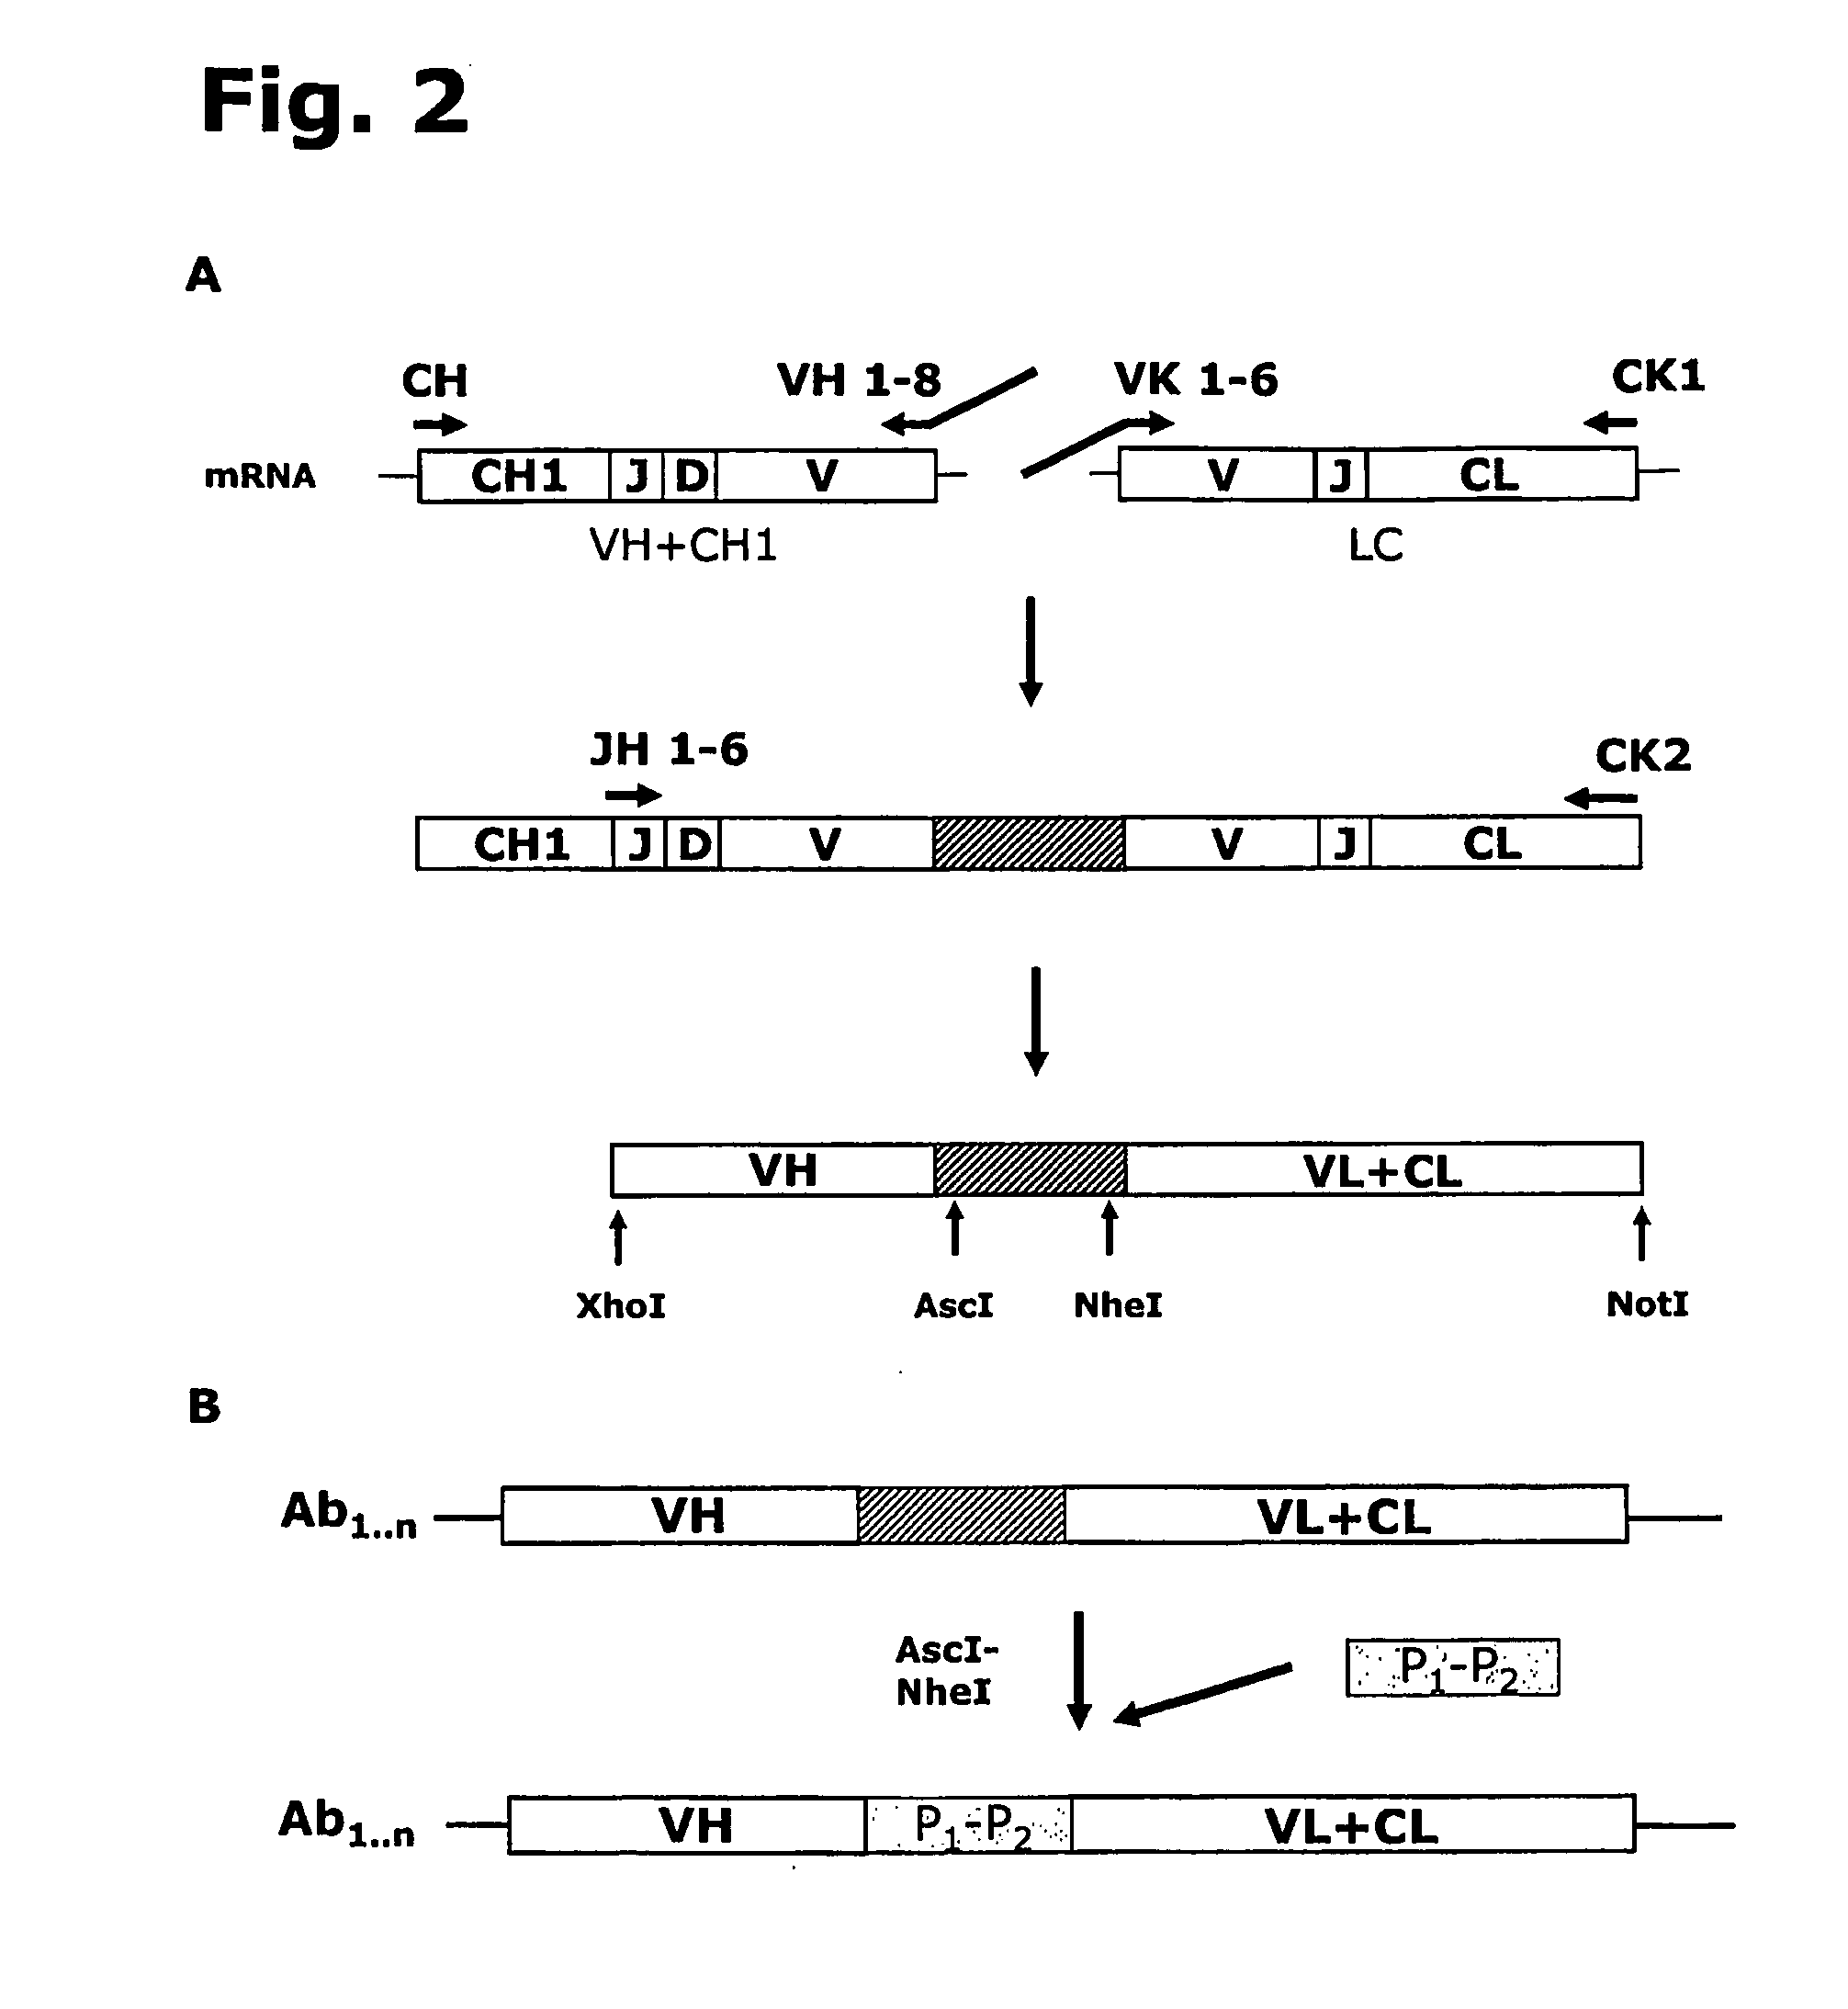 Recombinant polyclonal antibody for treatment of respiratory syncytial virus infections